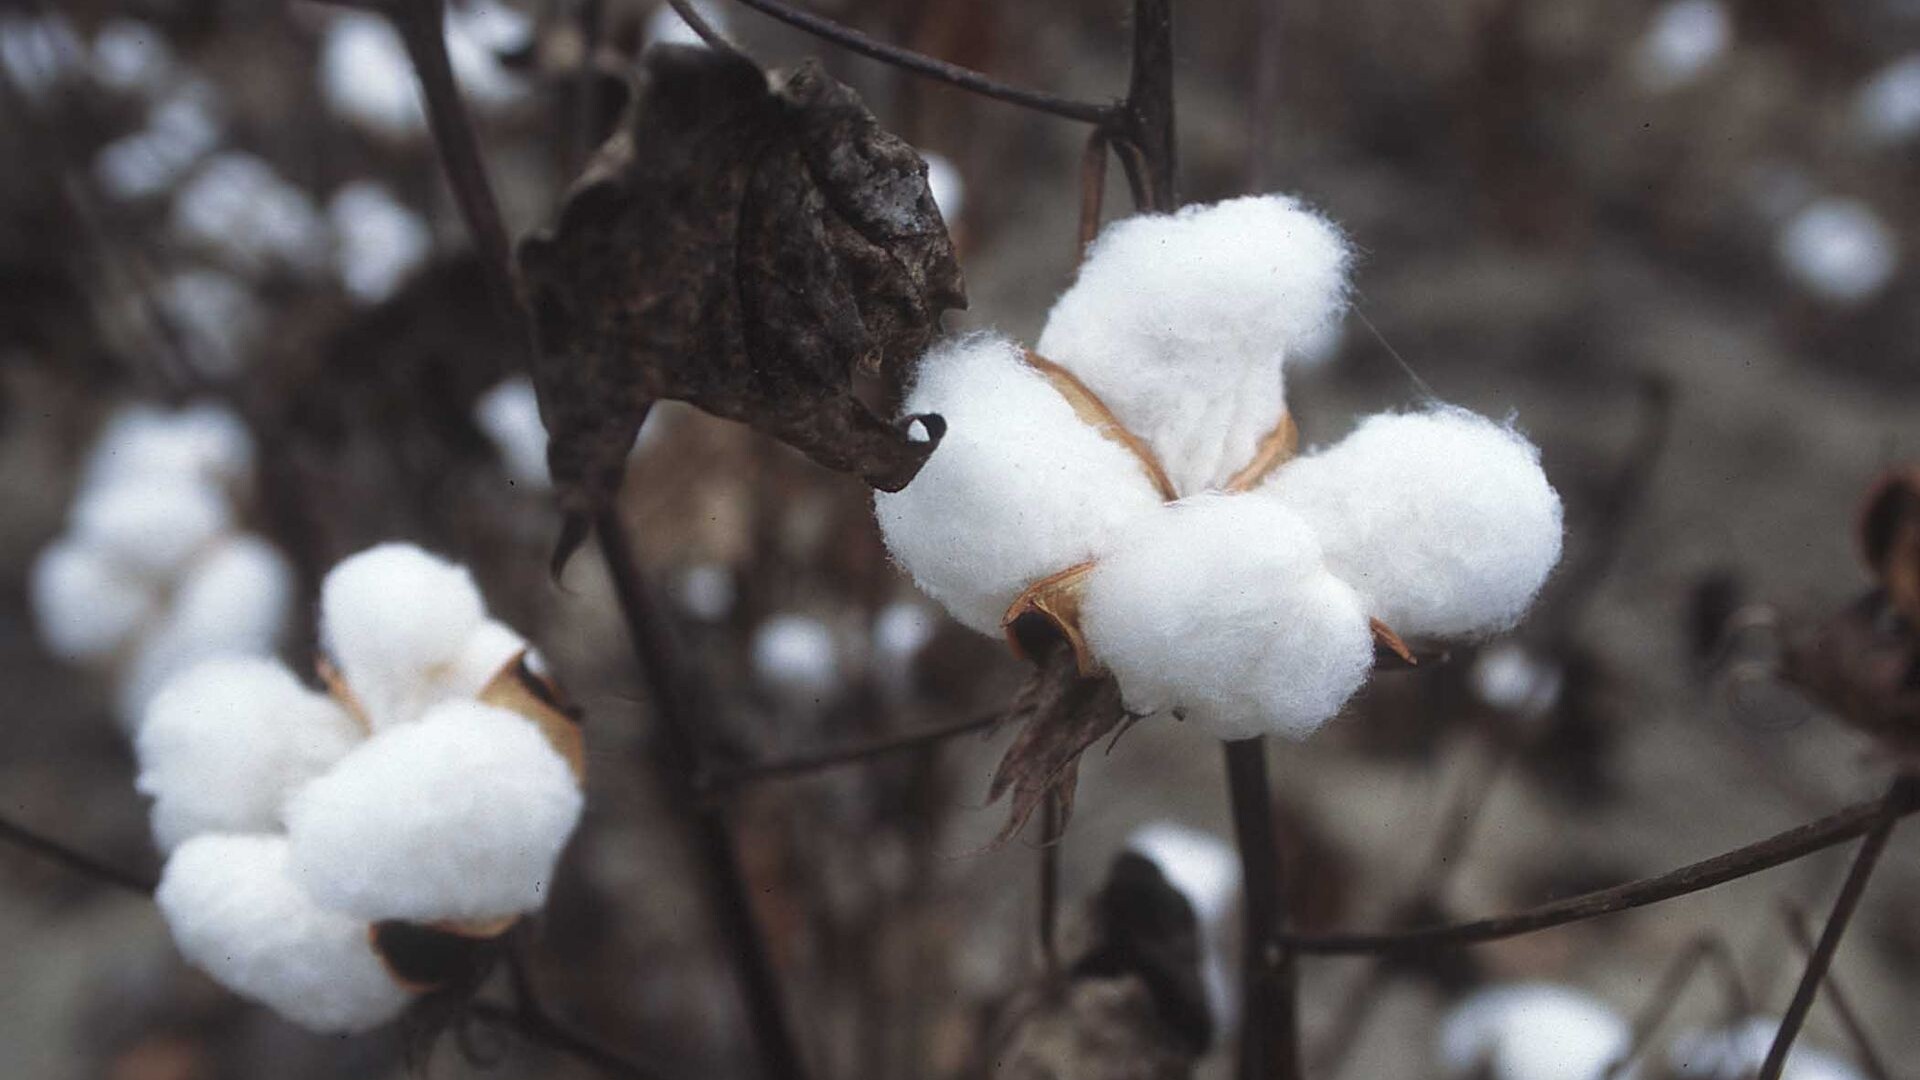 Bale Fungibility & Pakistan's Cotton Disaster